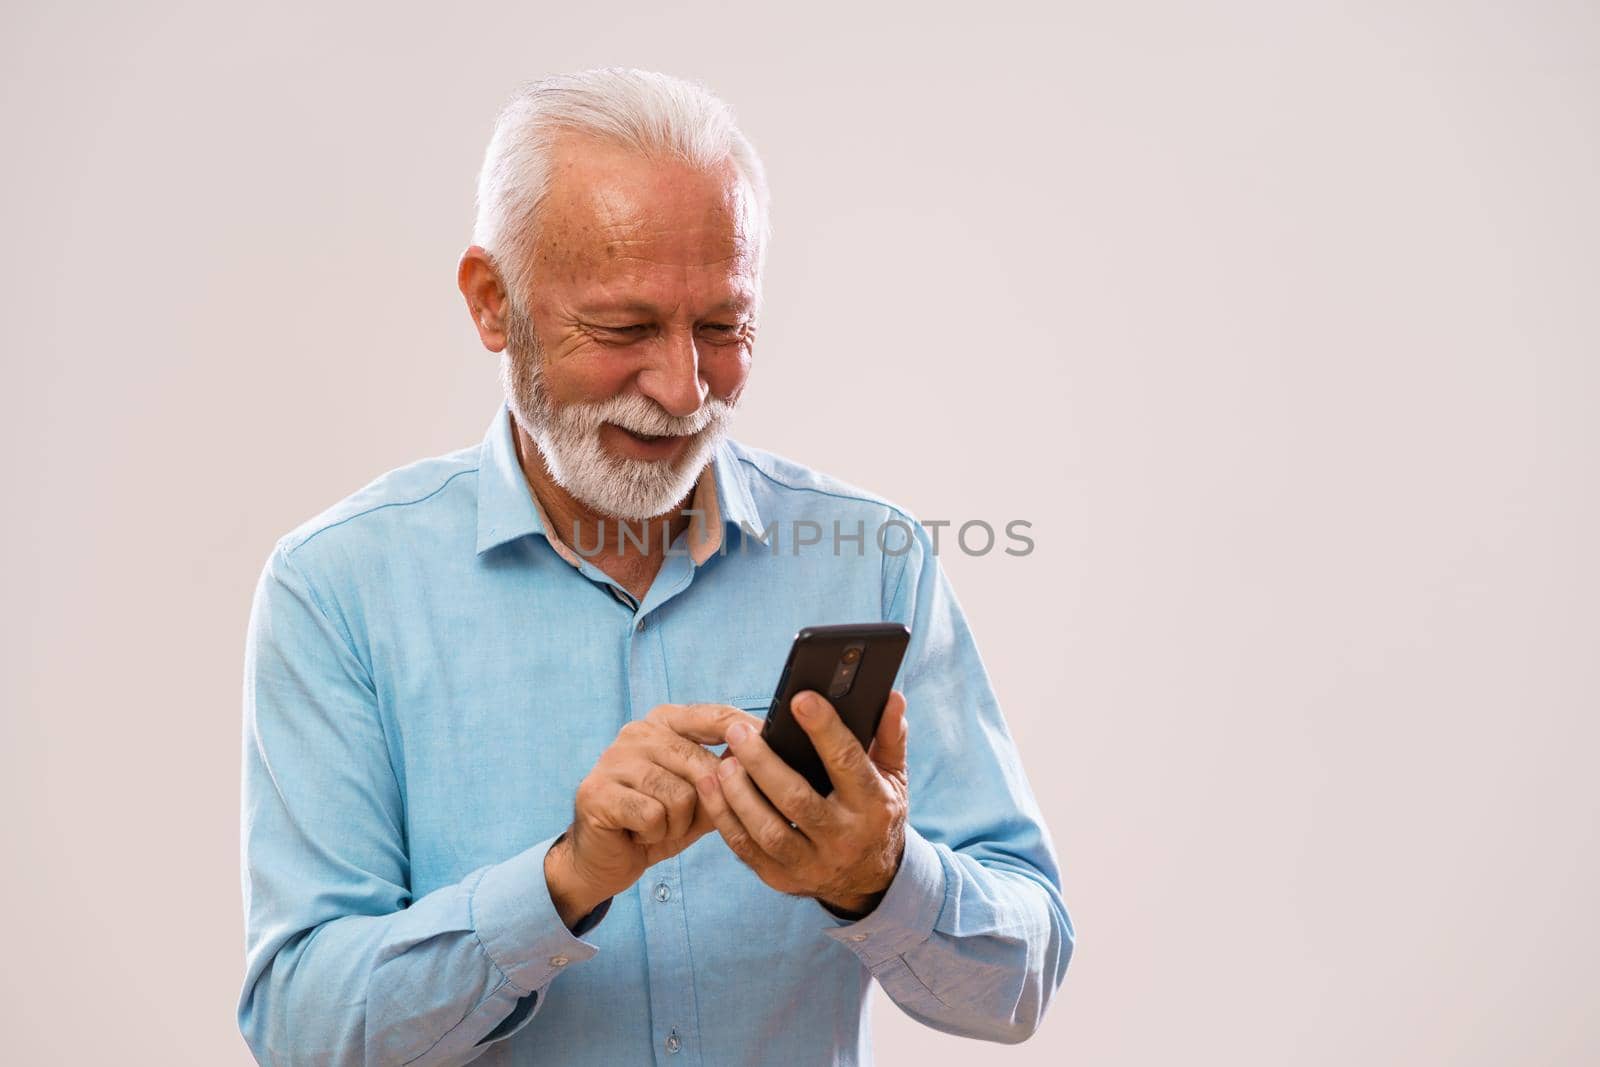 Portrait of cheerful senior man who is using smartphone.